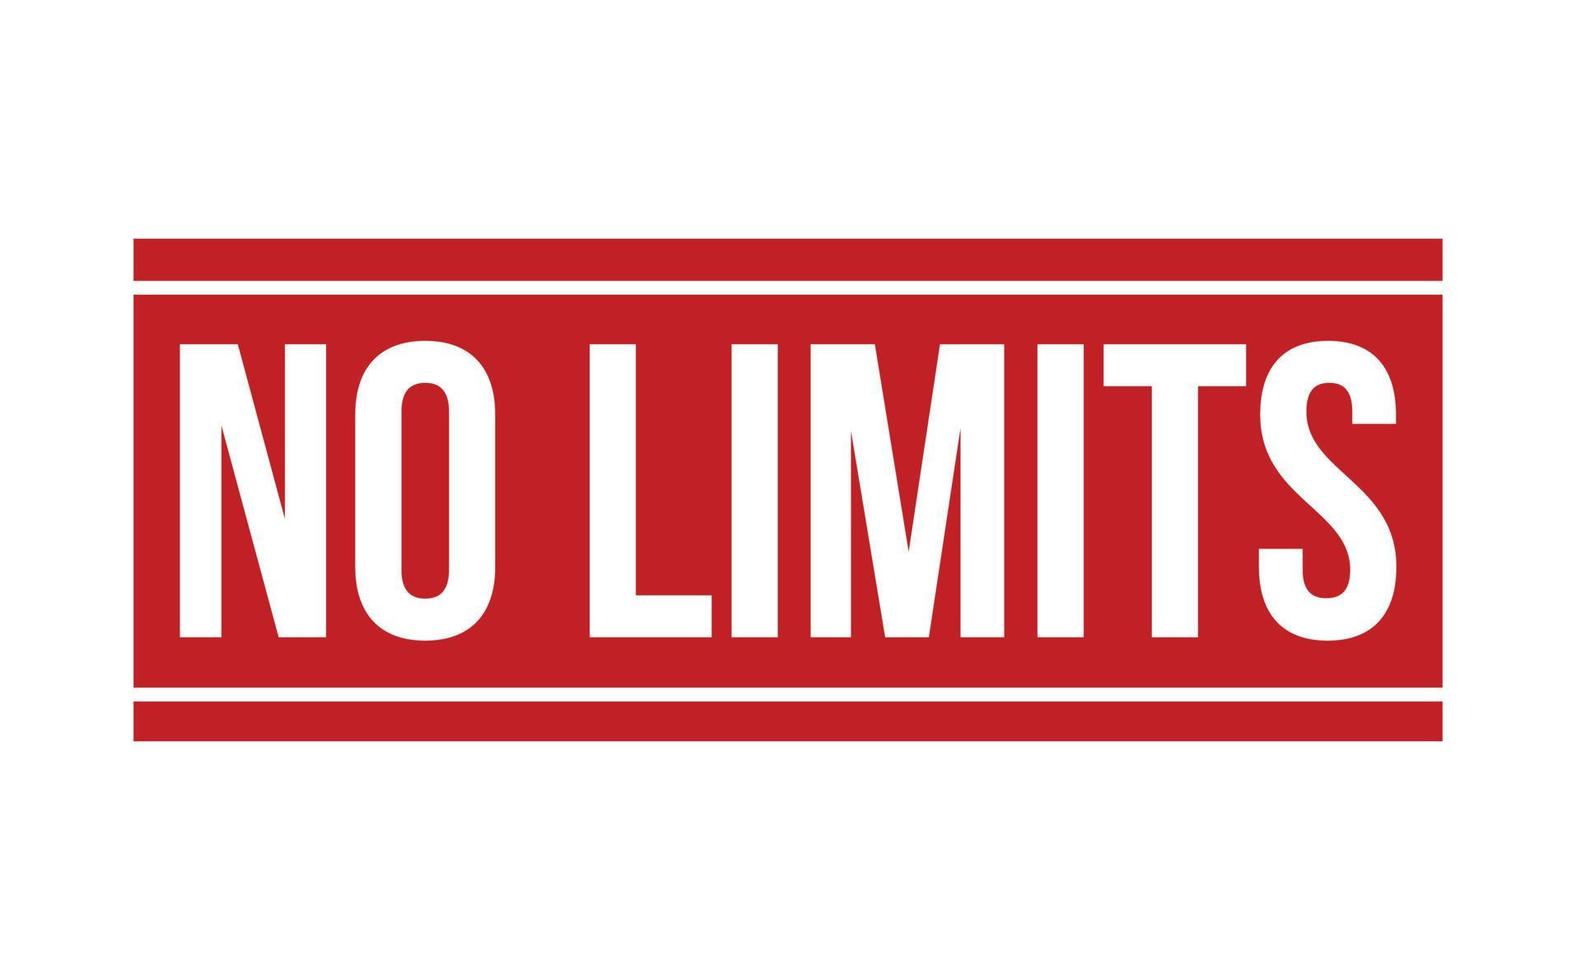 No Limits Rubber Stamp. Red No Limits Rubber Grunge Stamp Seal Vector Illustration - Vector